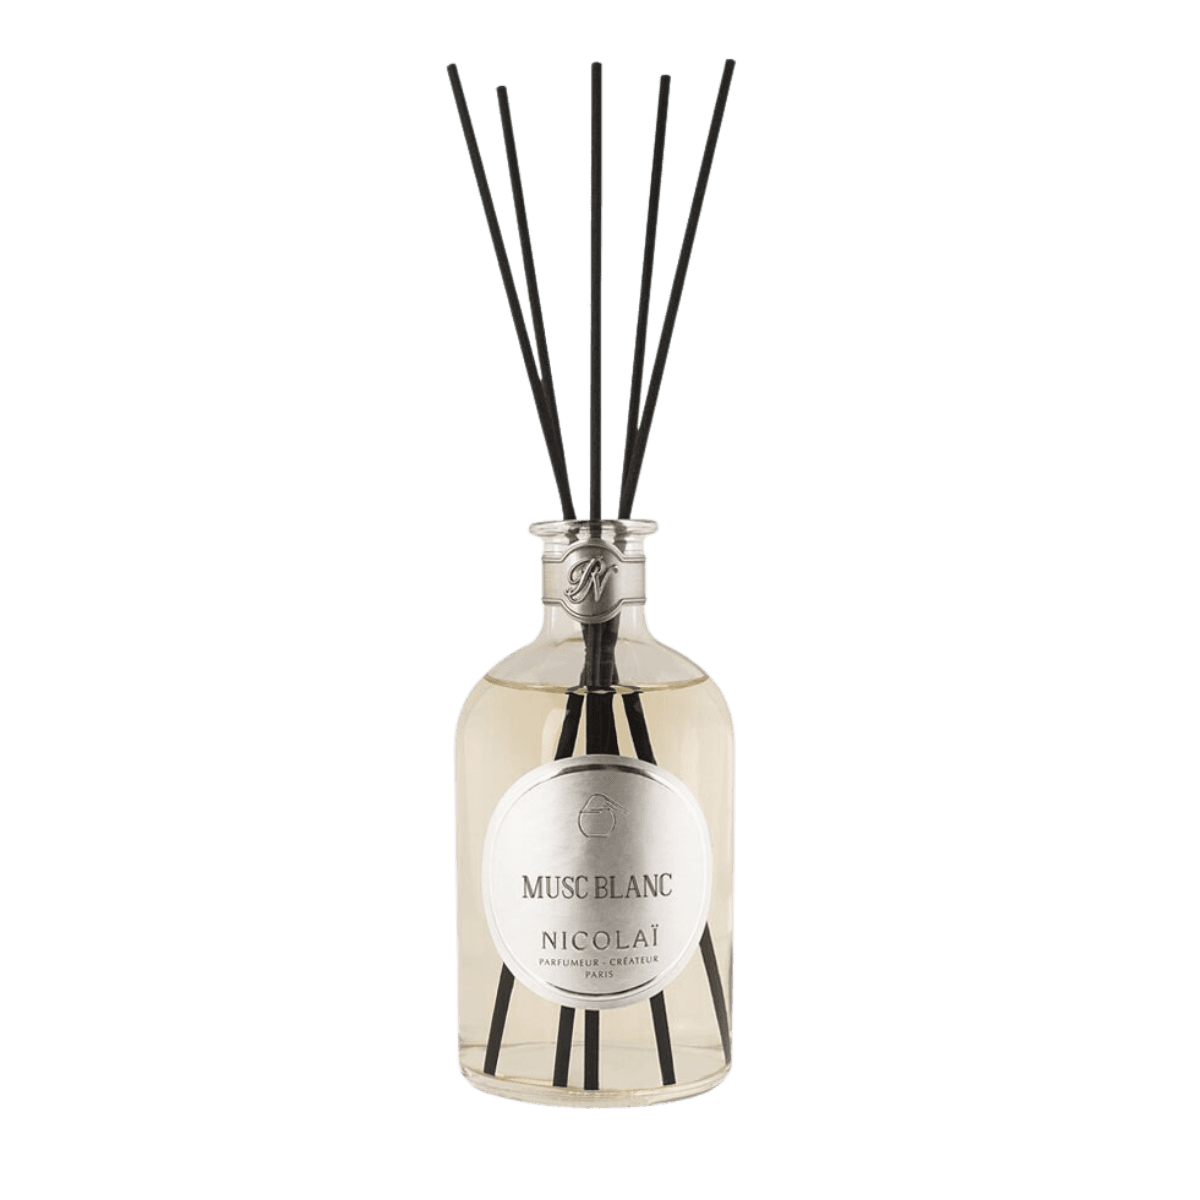 Image of Musc Blanc reed diffuser by Nicolai